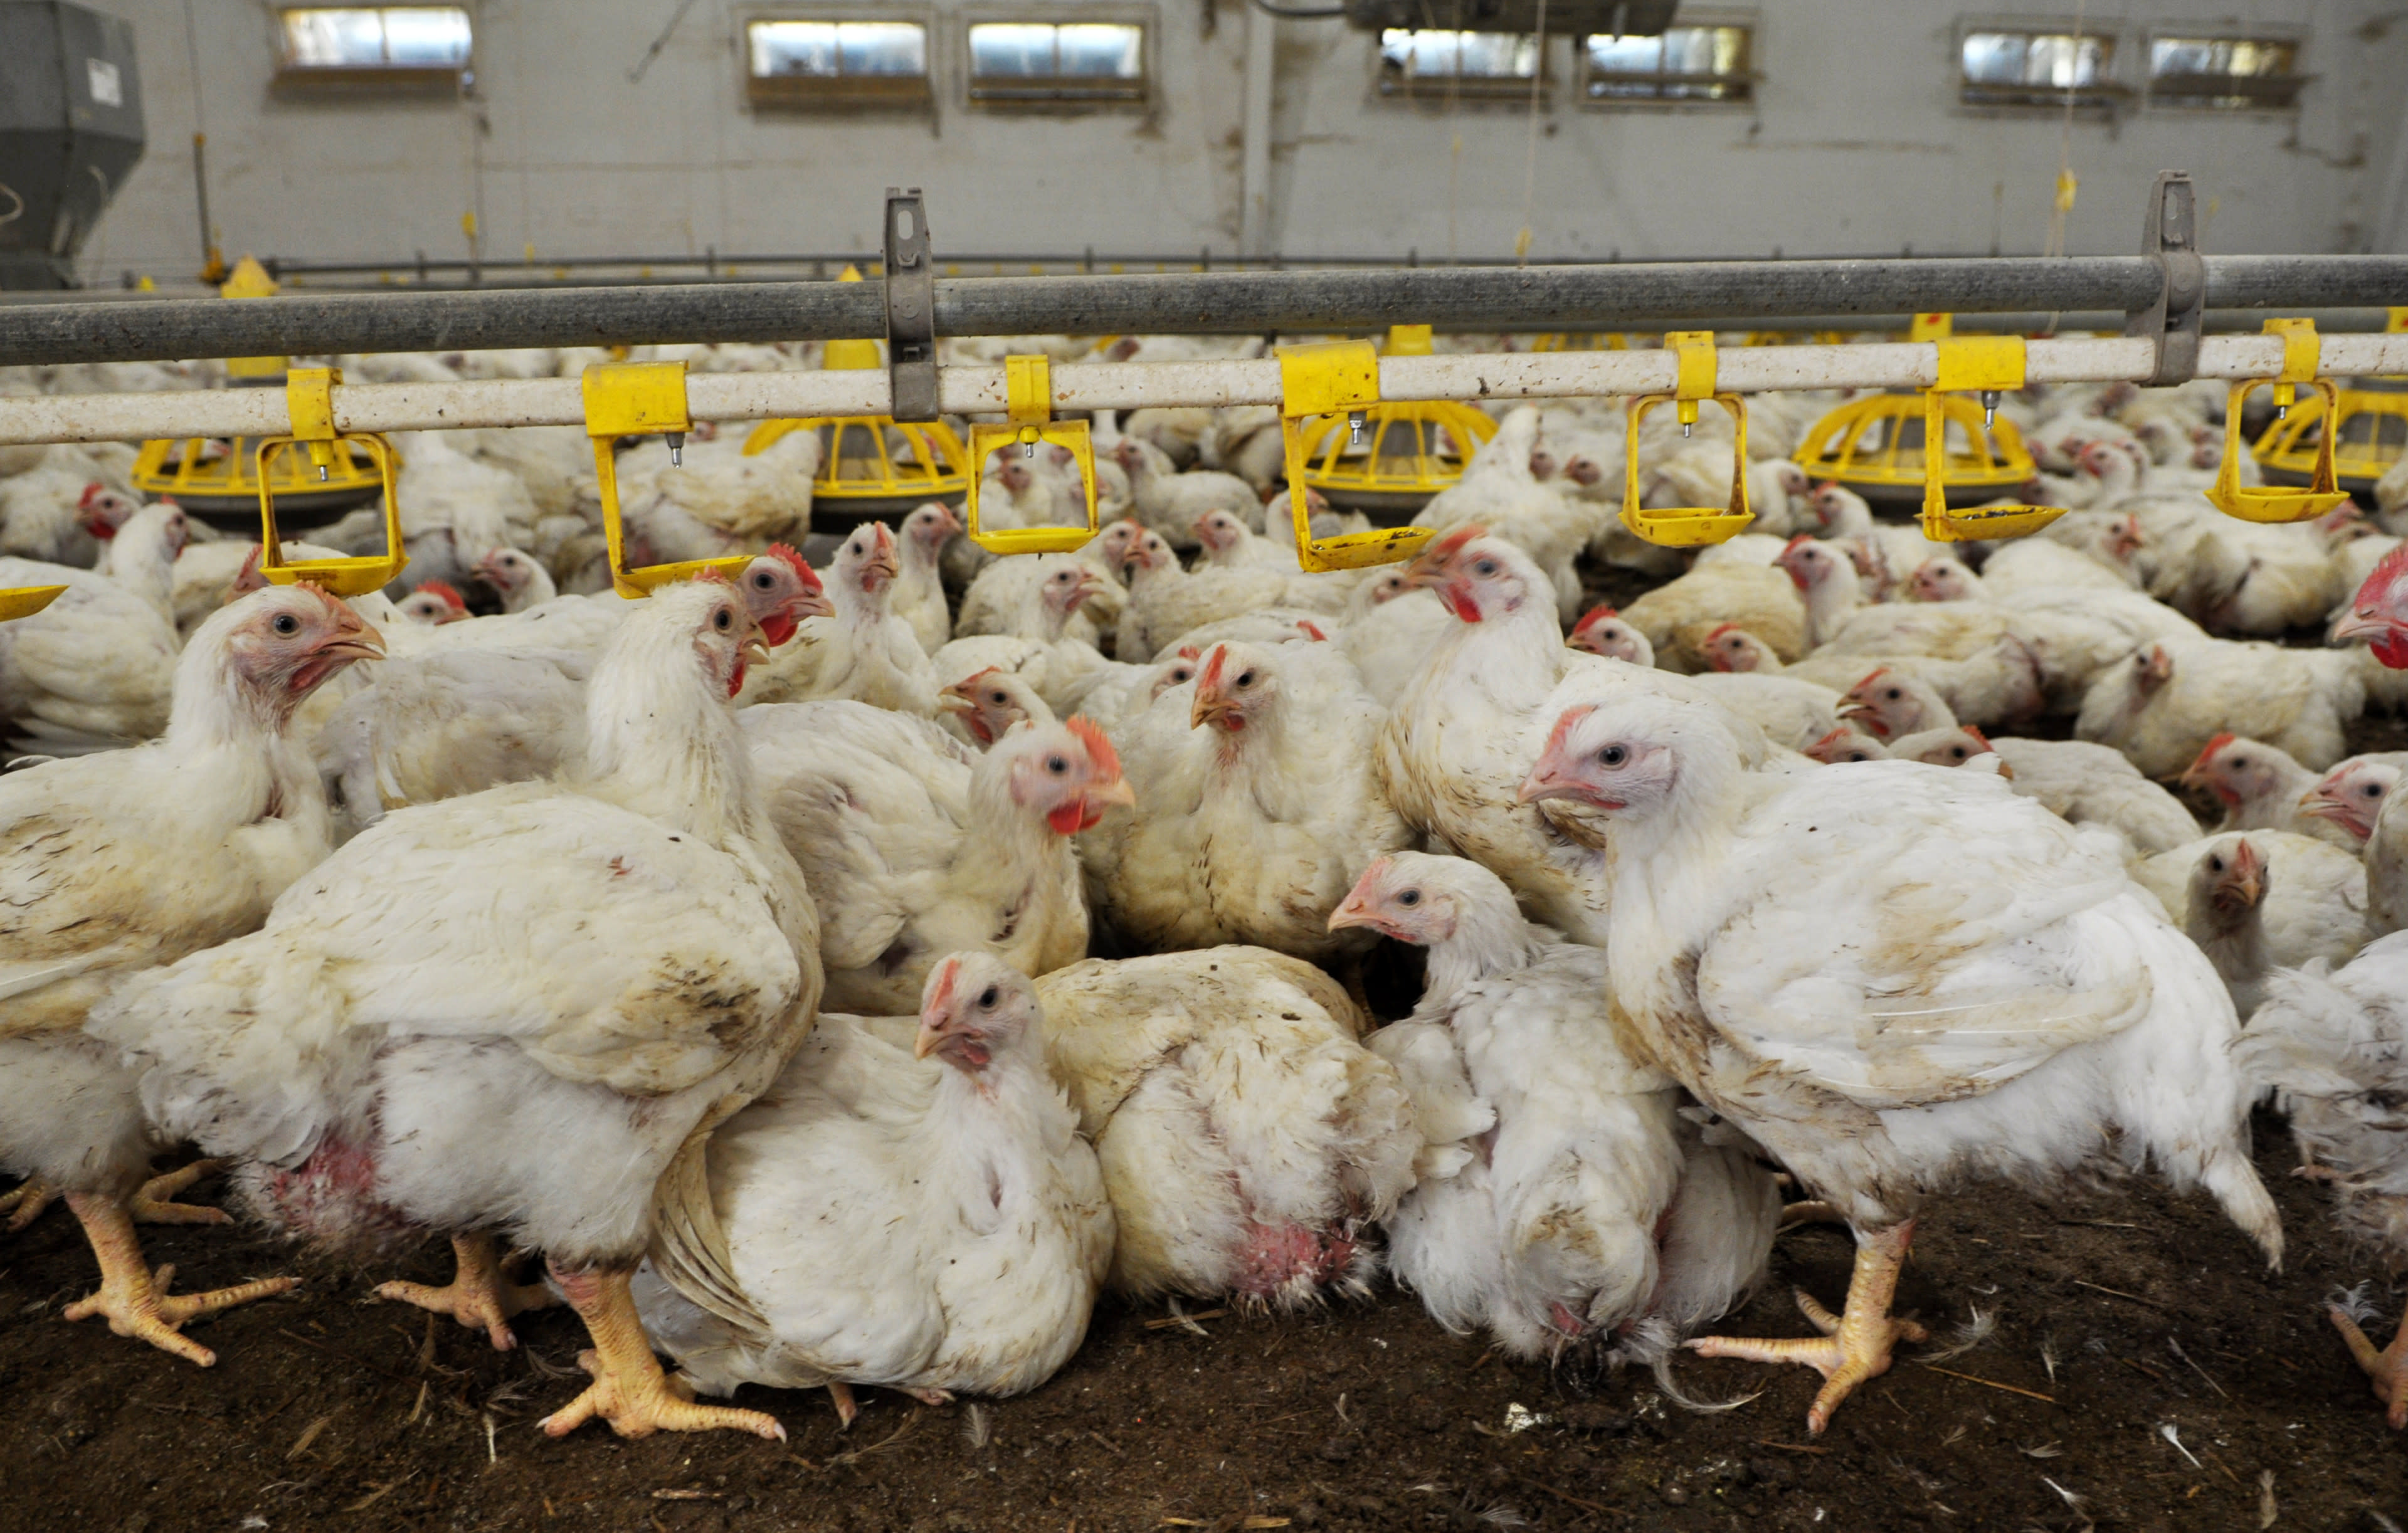 Chicken Farm: Why Are Chickens Farmed and How Bad Is It?